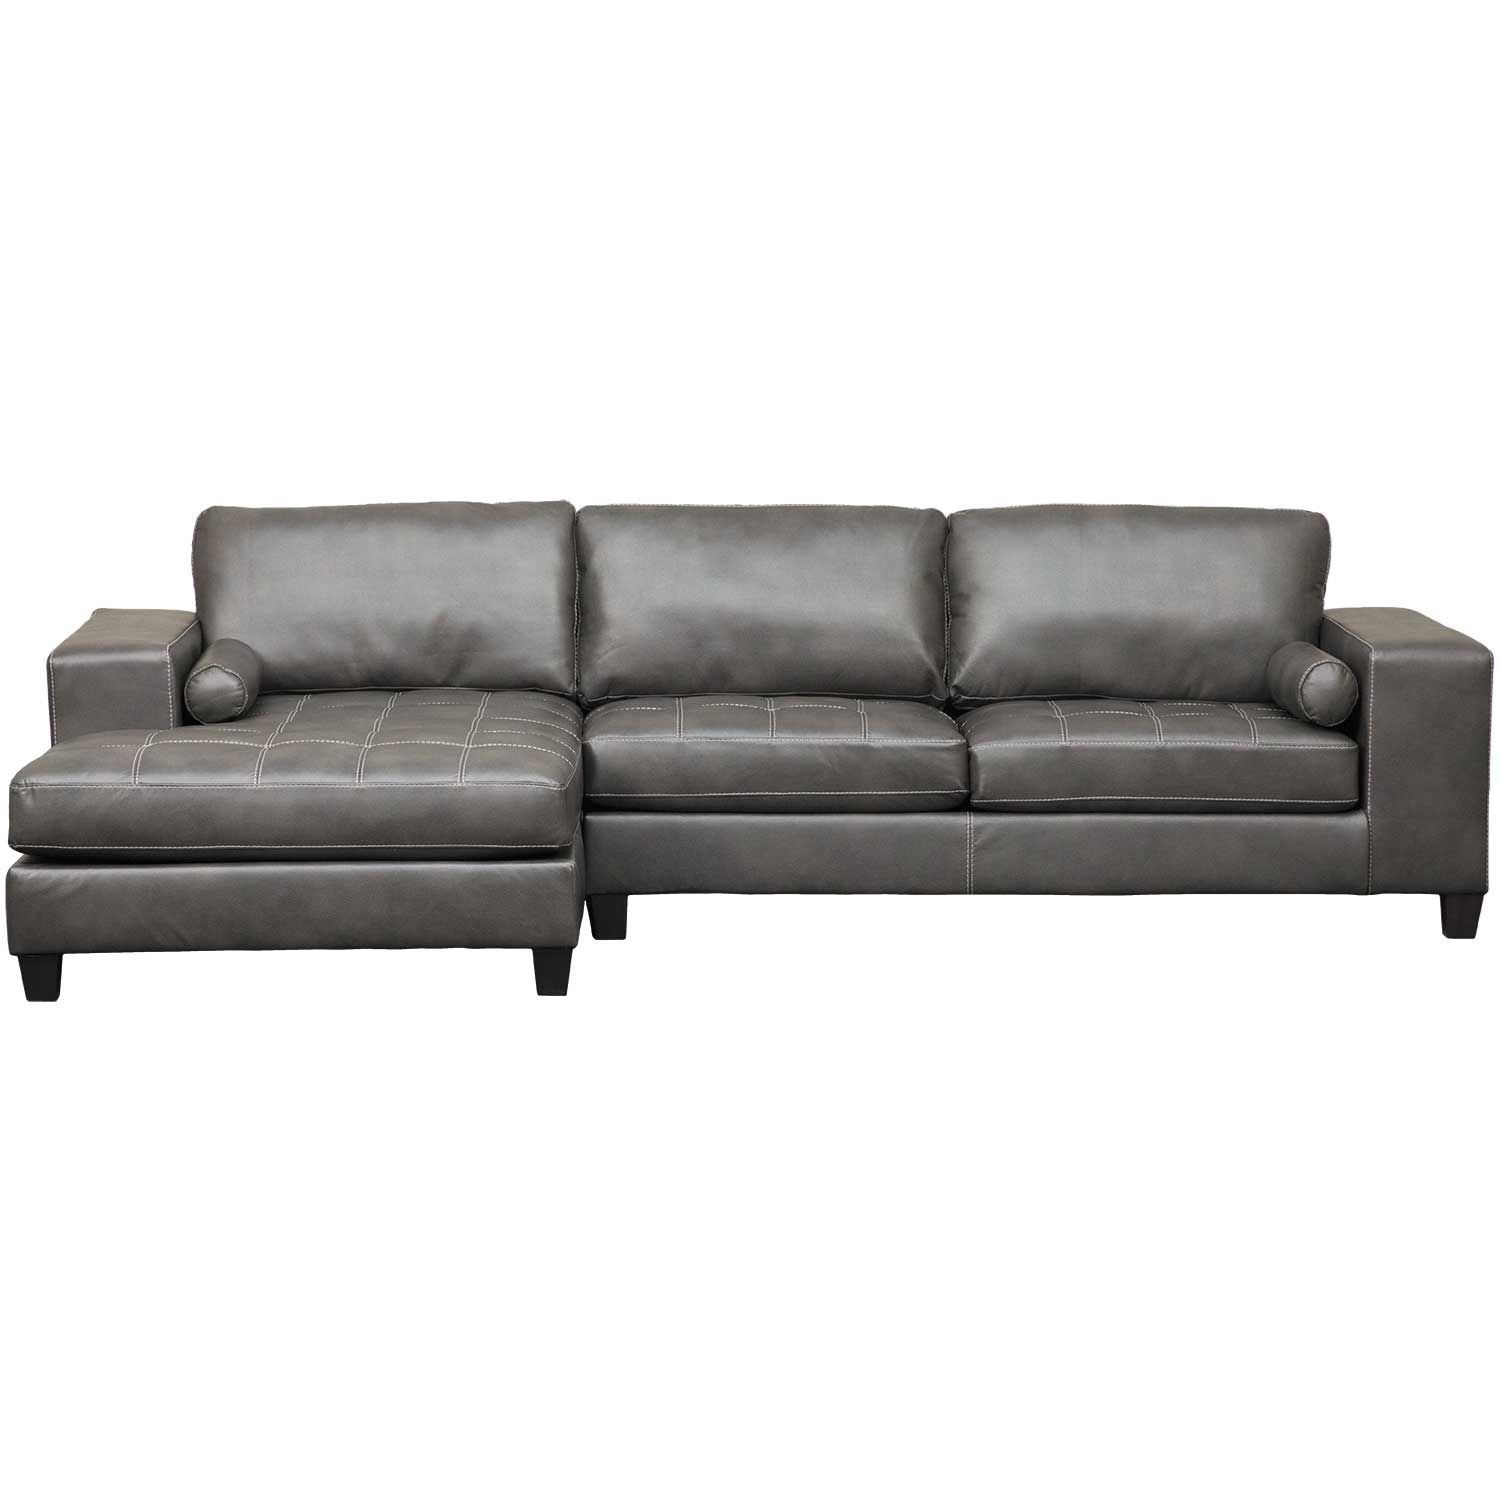 90+ 2 Piece Sectional With Chaise – Arrowmask 2 Piece Sectional W Pertaining To Arrowmask 2 Piece Sectionals With Raf Chaise (View 21 of 30)